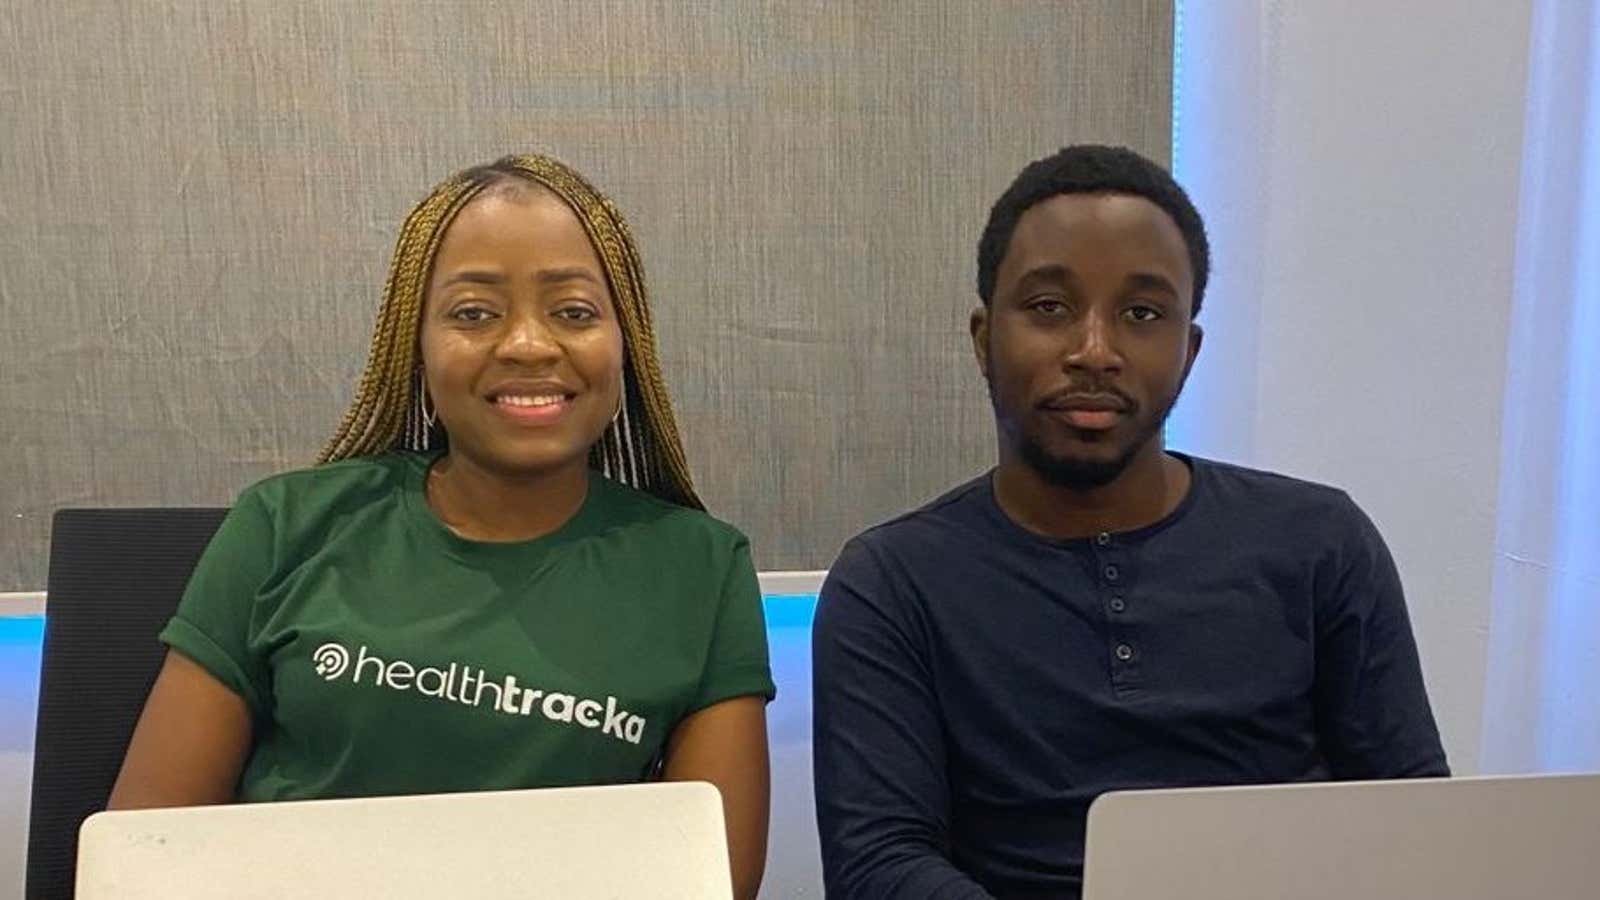 A $25,000 will help Nigerian startup Healthtracka get on track.